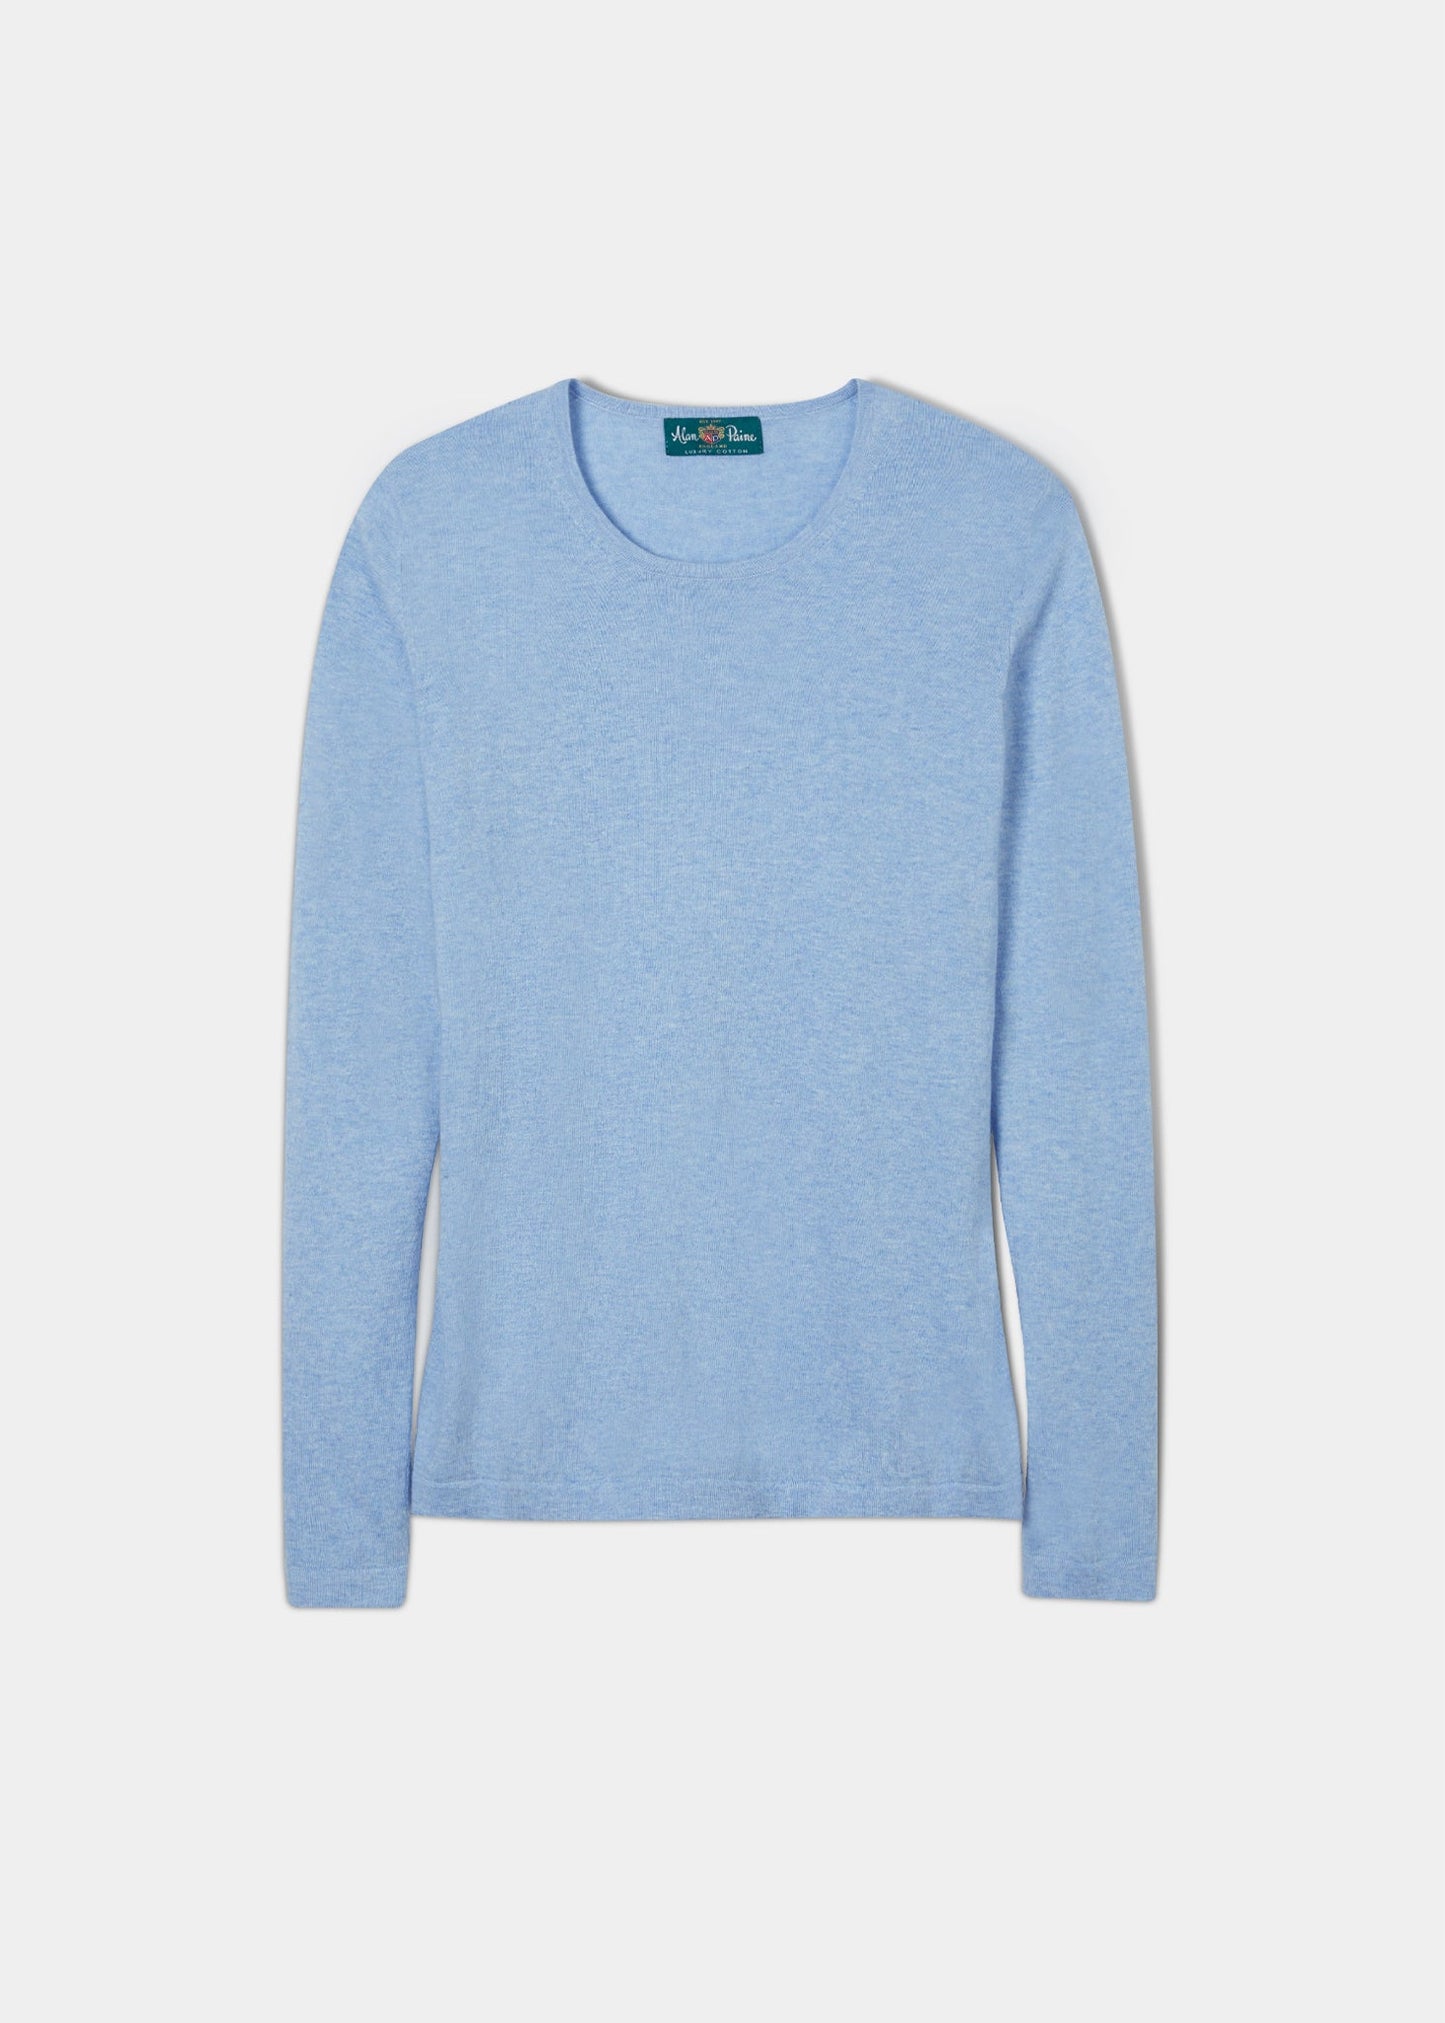 Alan Paine ladies cotton cashmere jumper in colourway sand with a crew neck